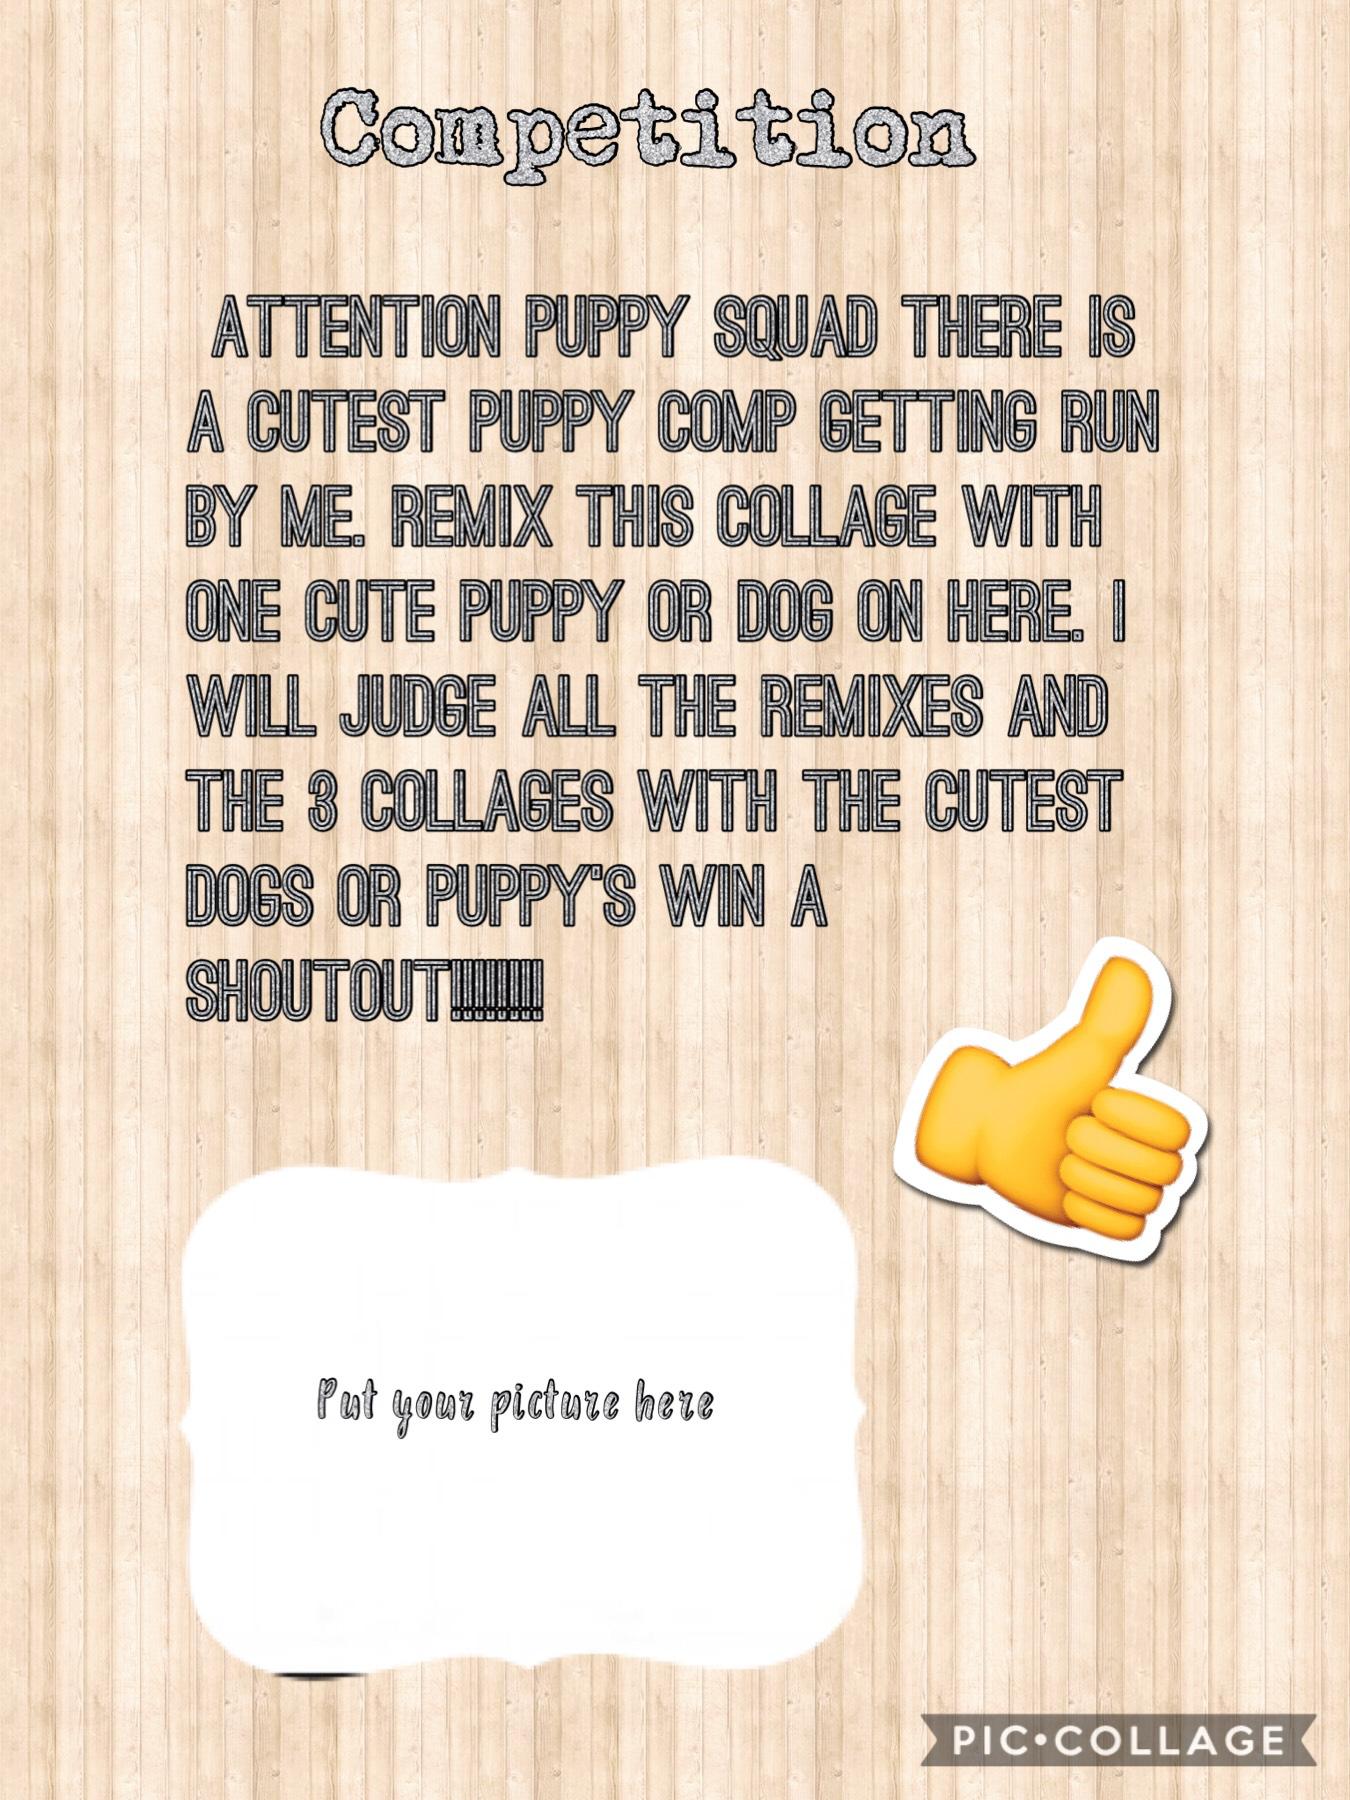 Hey hi, puppy squad here’s another comp for a shoutout!! :)